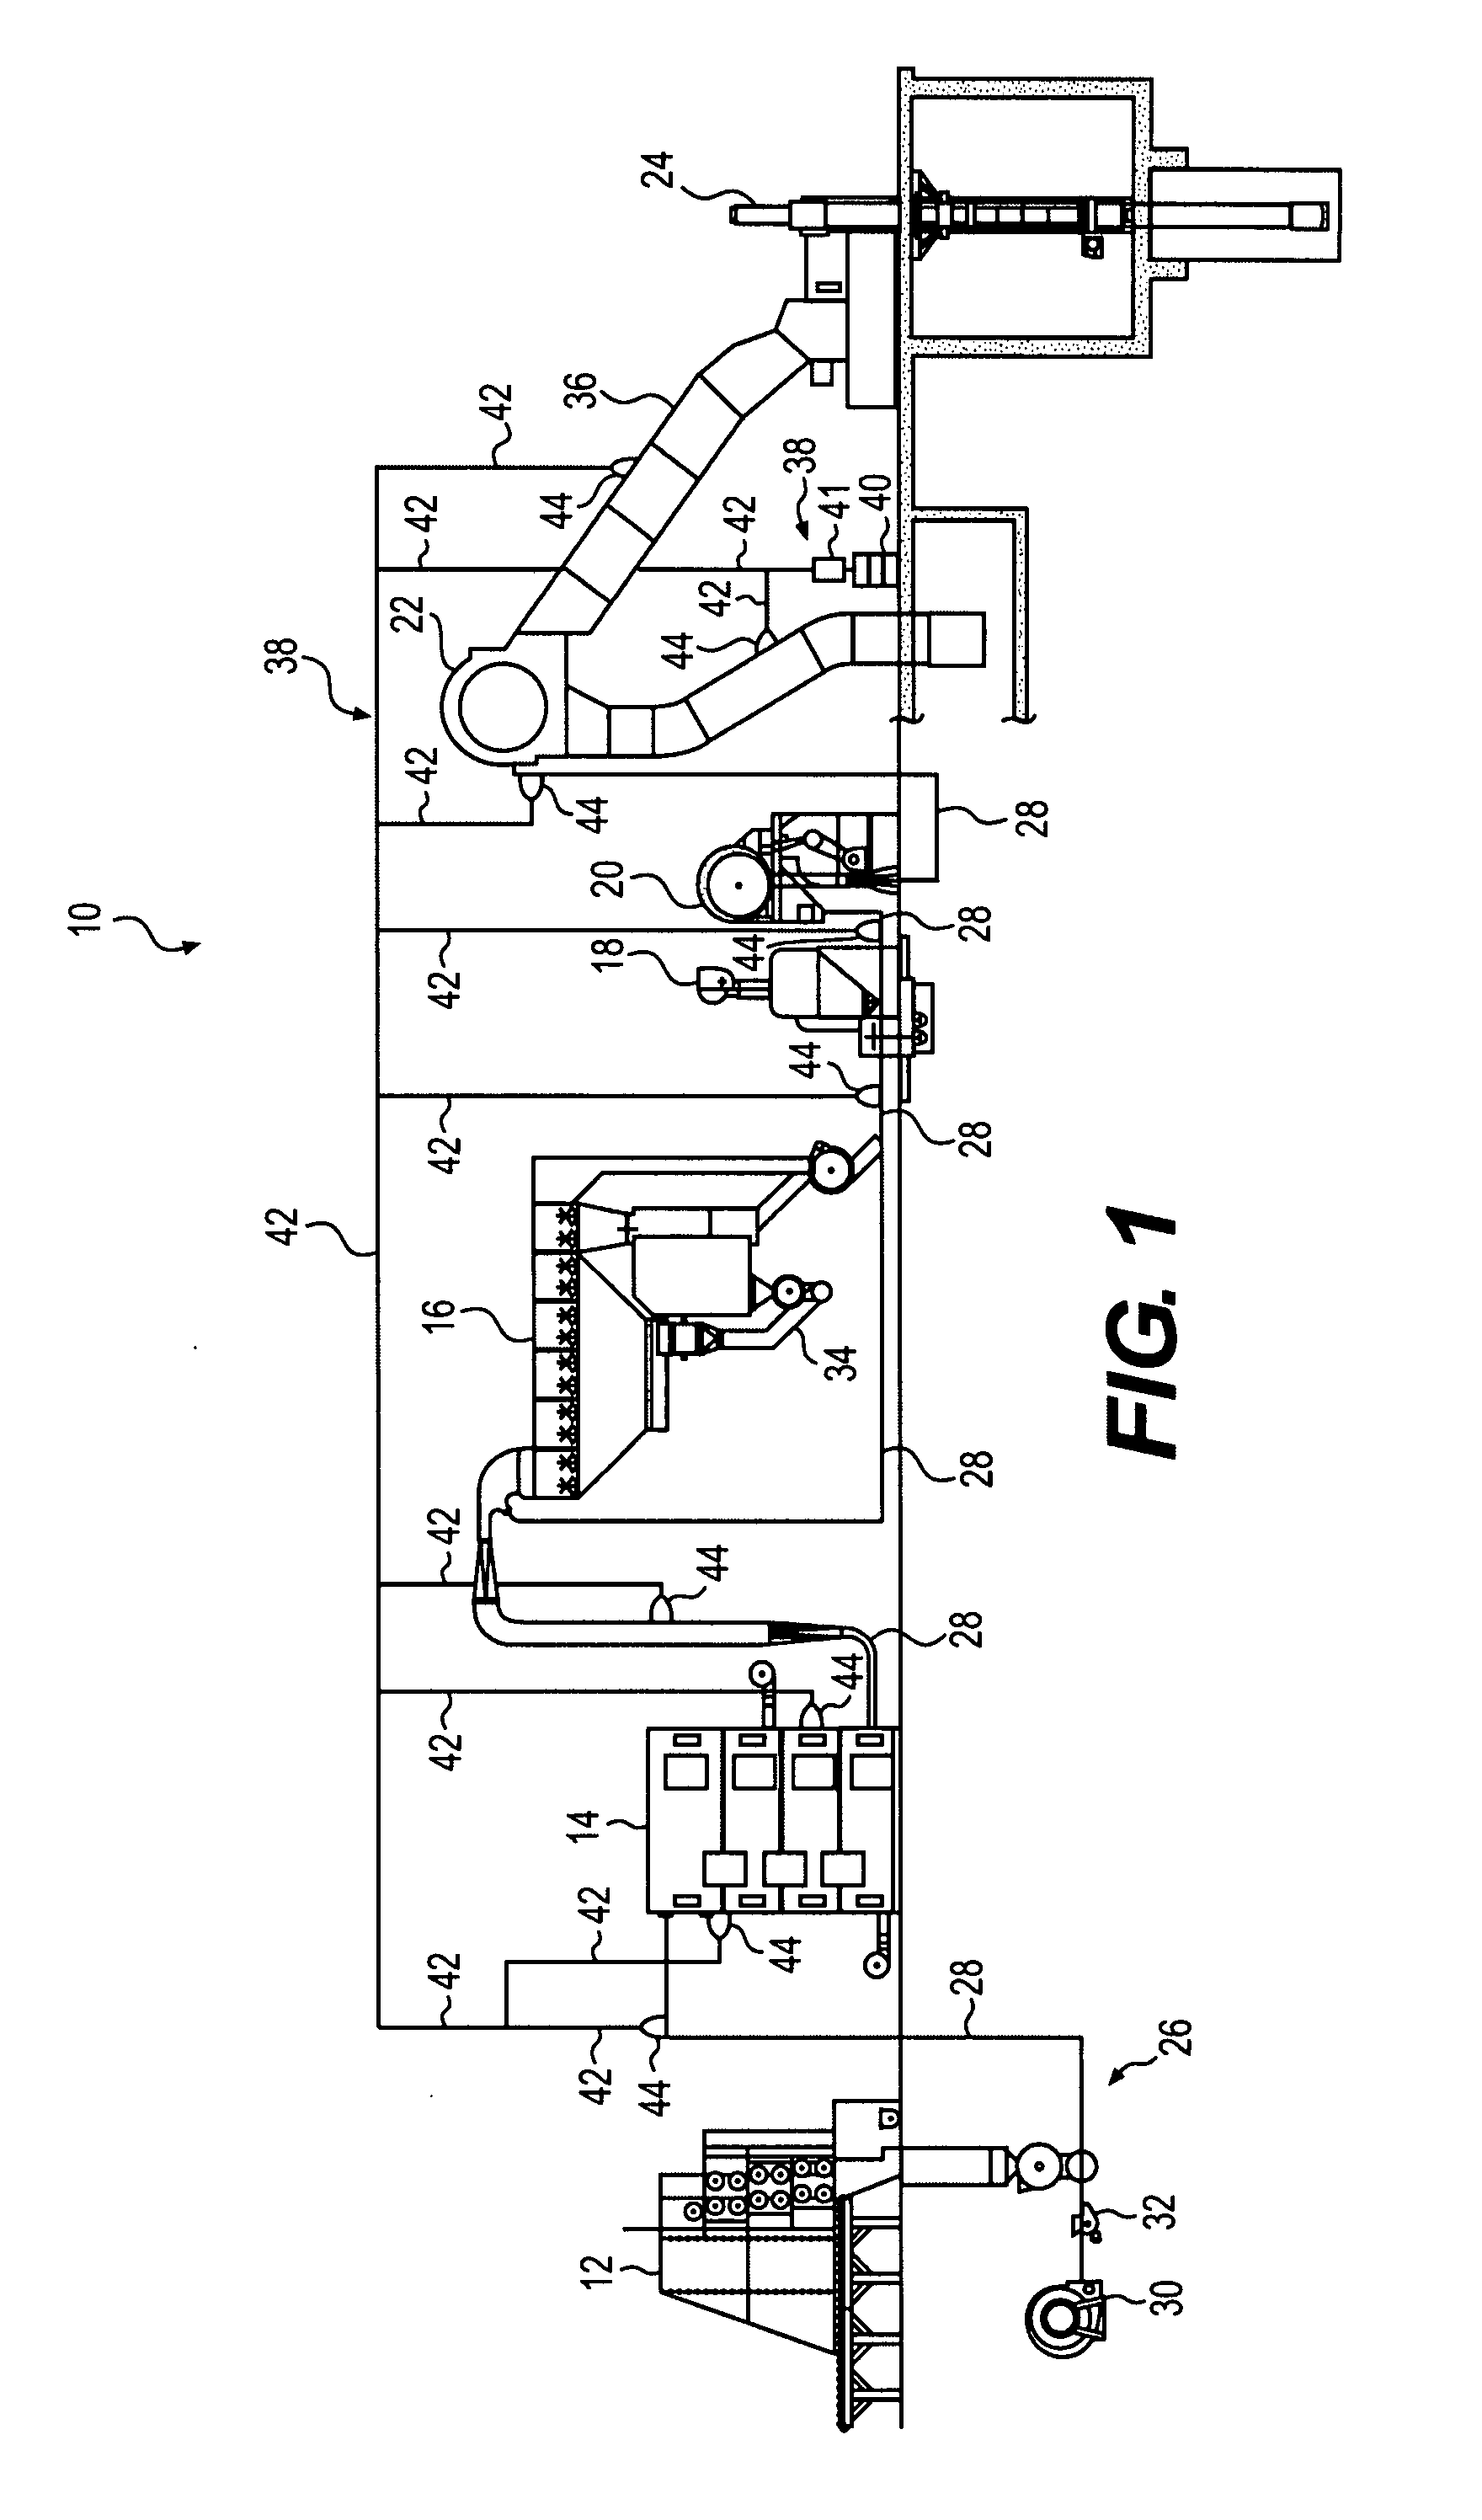 System and method for processing fiber